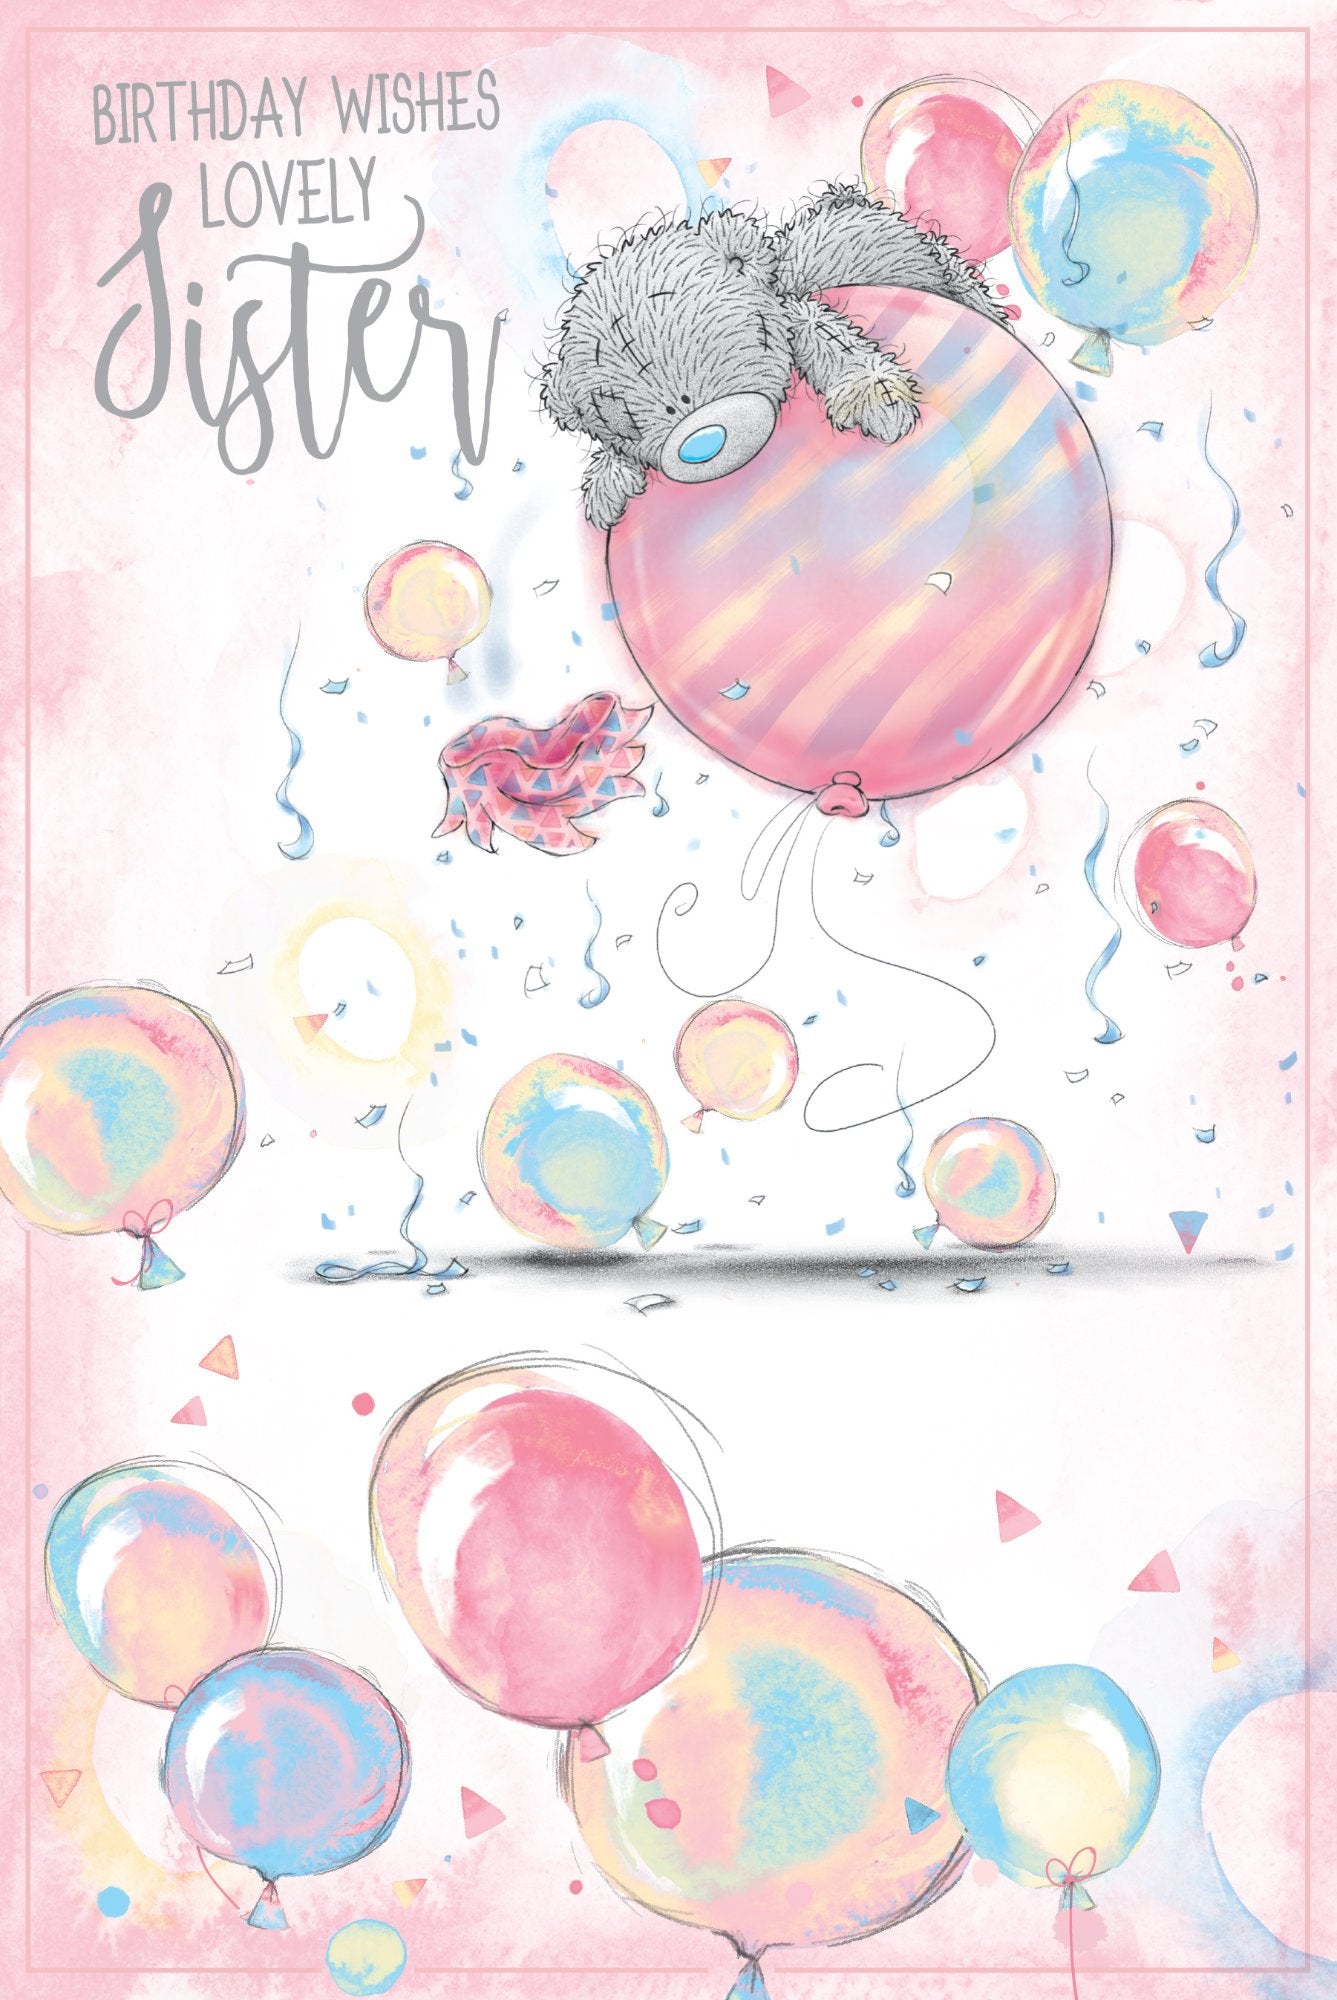 Photograph of Sister Birthday Teddy Balloons Greetings Card at Nicole's Shop